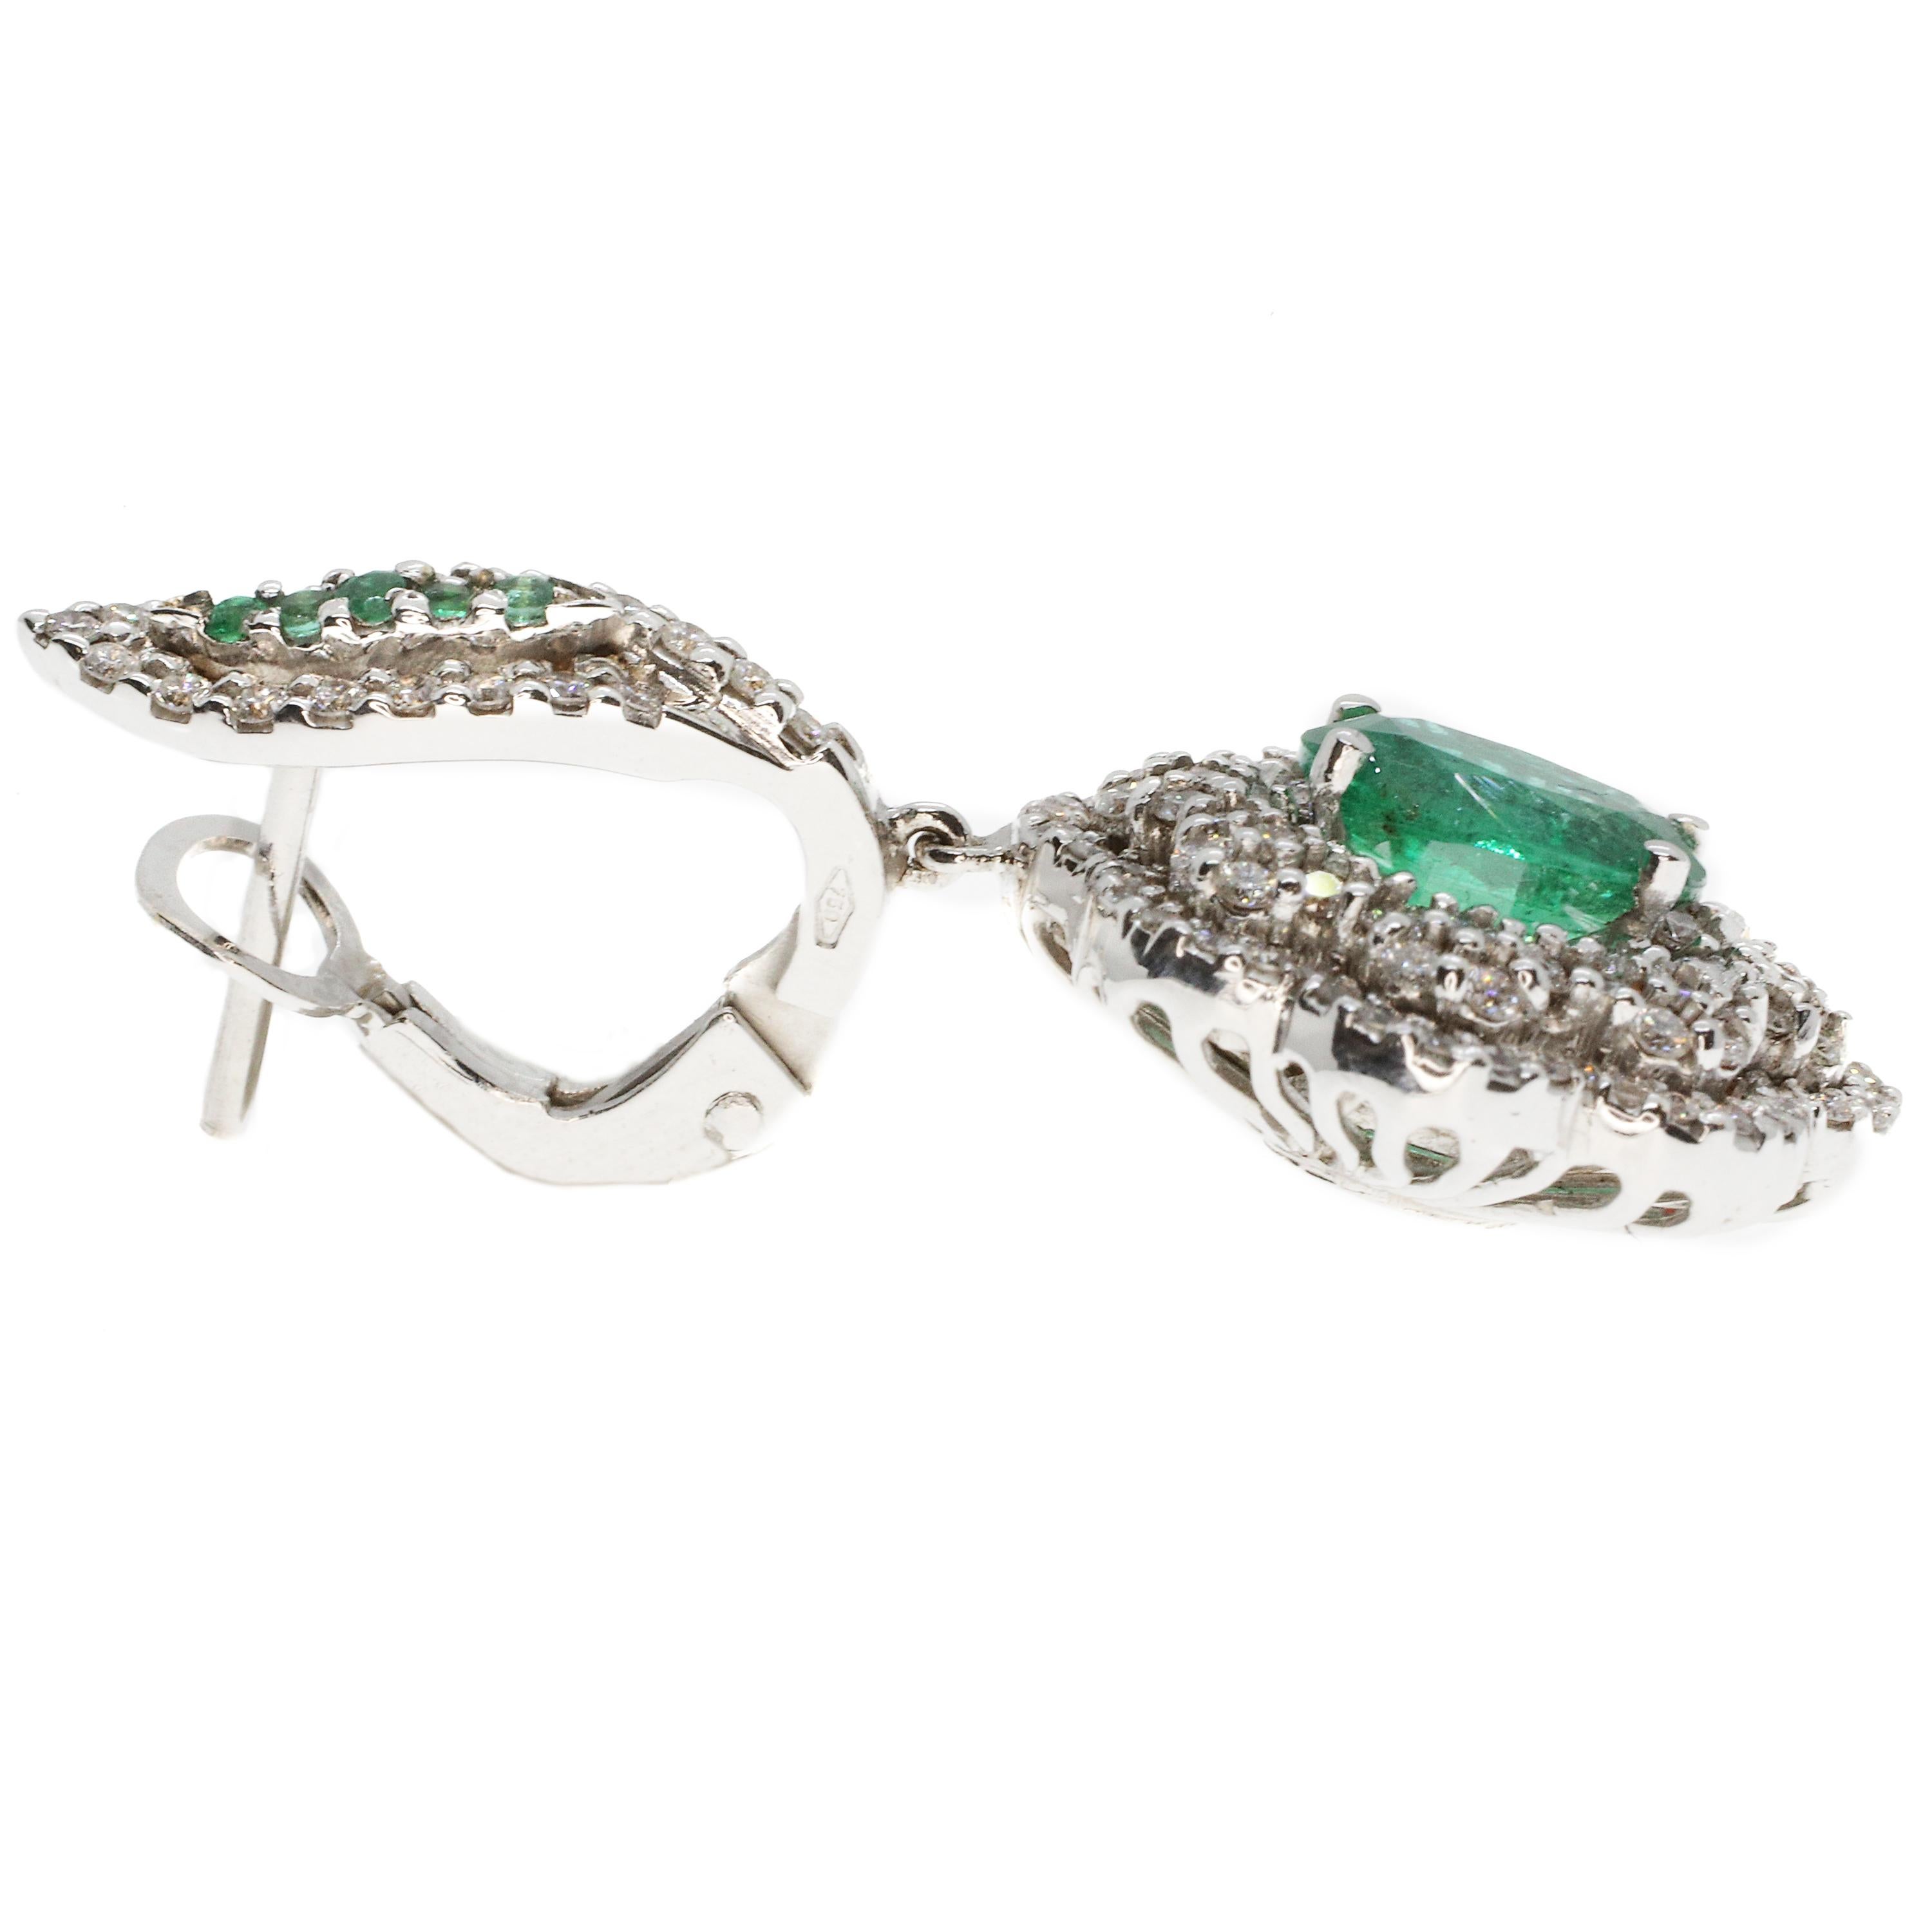 These drop earrings, masterfully created by hand from 18-karat white gold are each set with a vibrant emerald. Clusters of brilliant white diamonds 